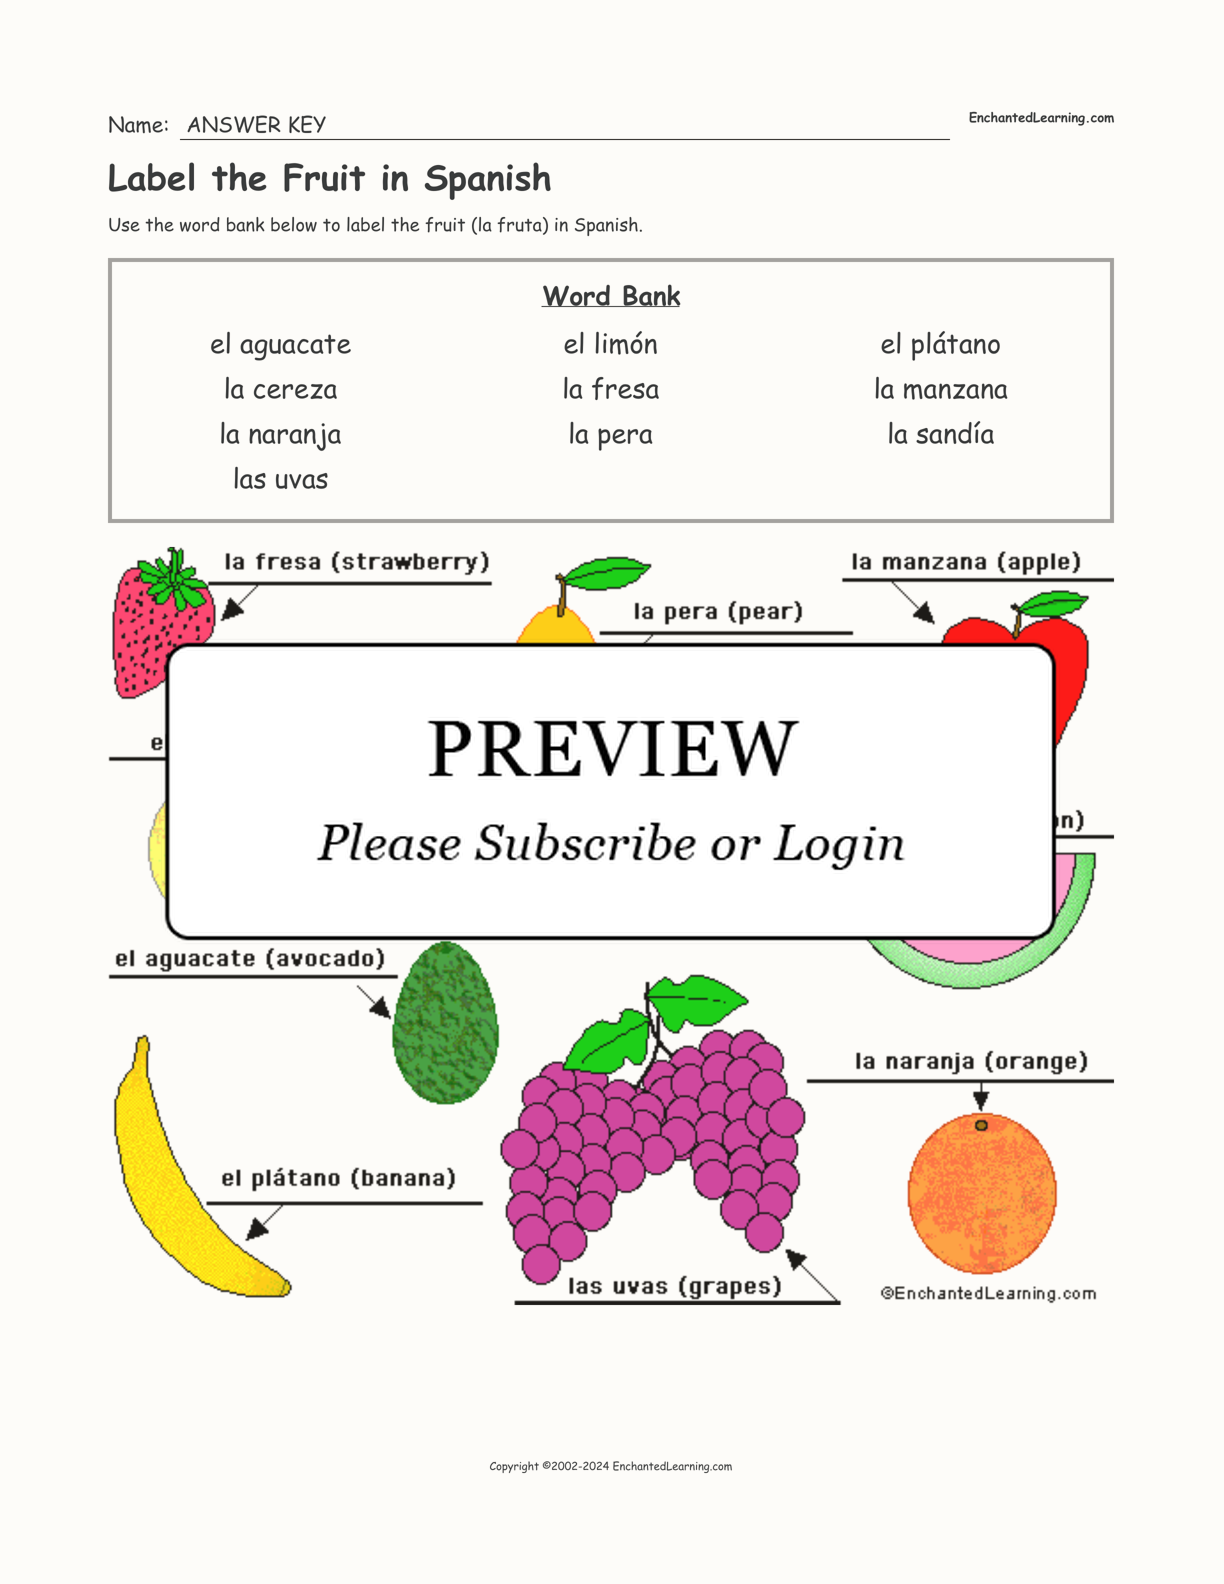 Label the Fruit in Spanish interactive worksheet page 2